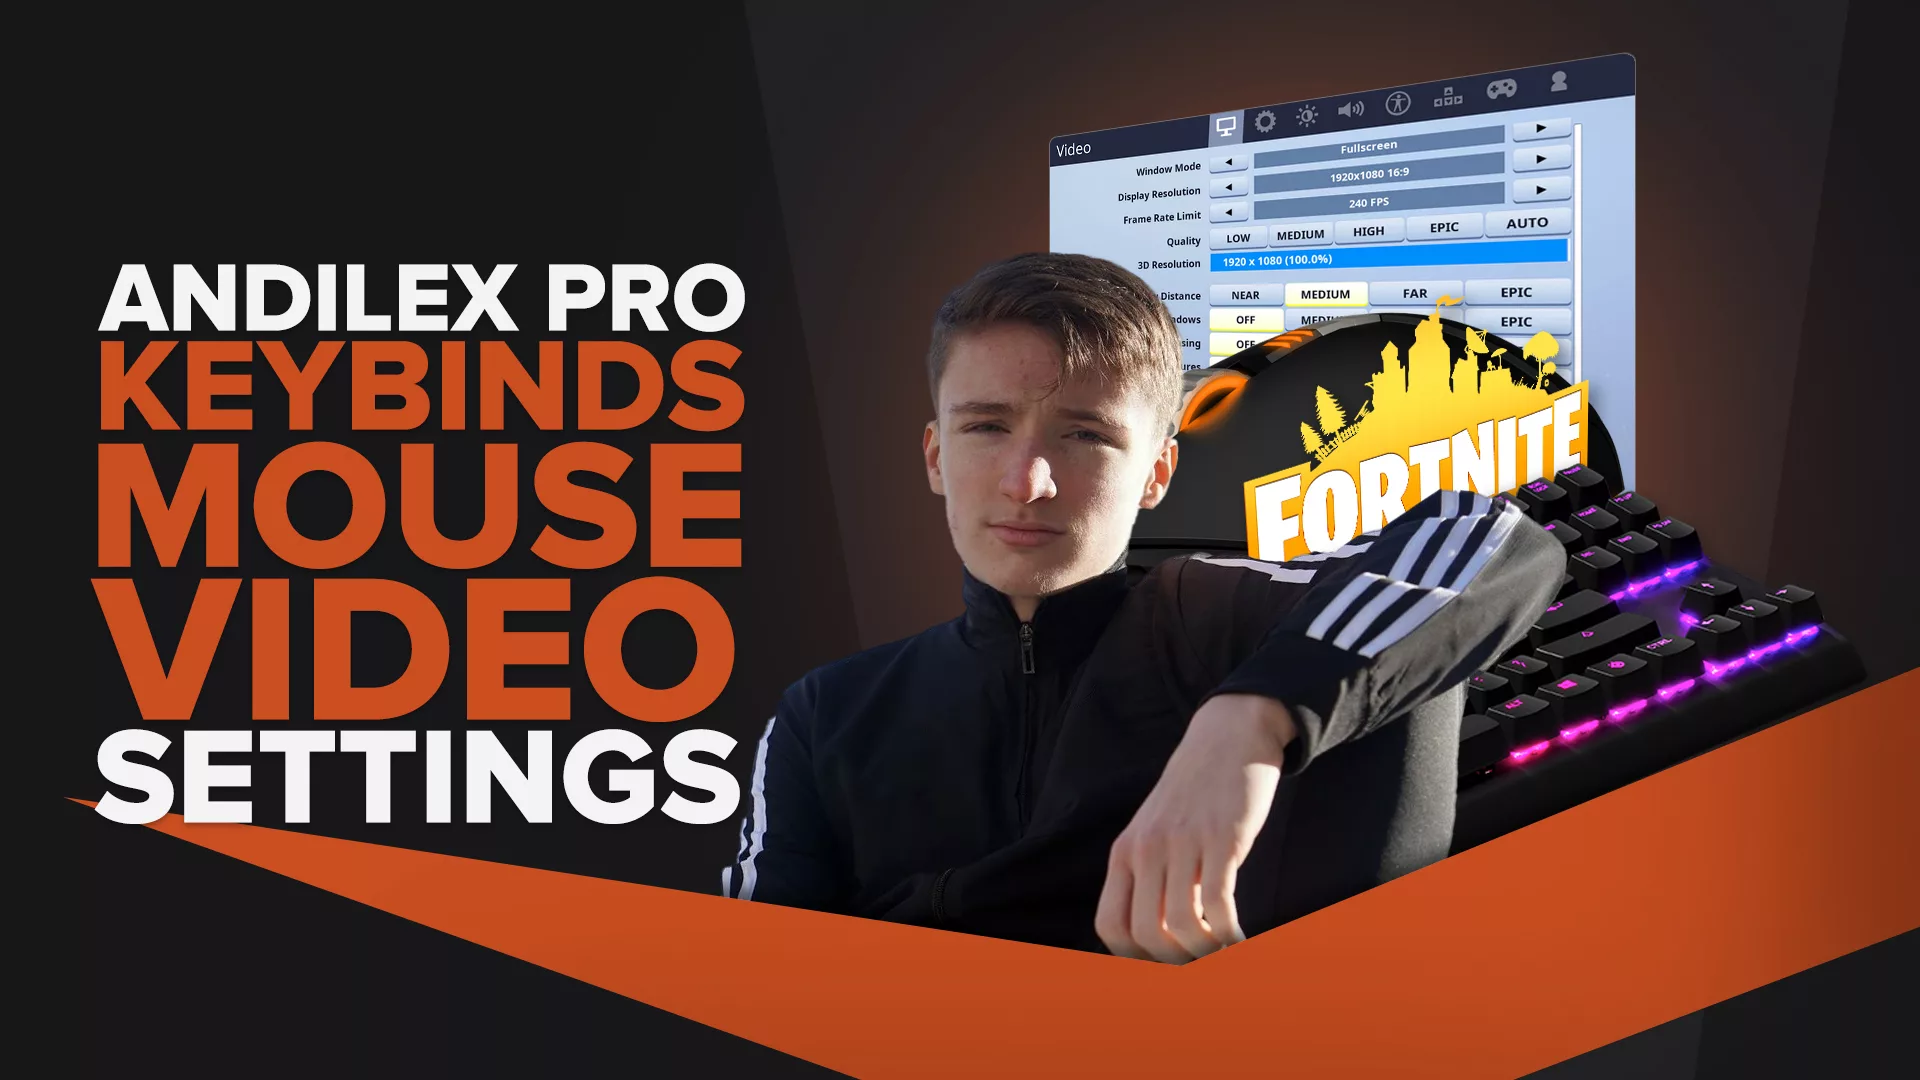 Andilex | Keybinds, Mouse, Video Pro Fornite Settings